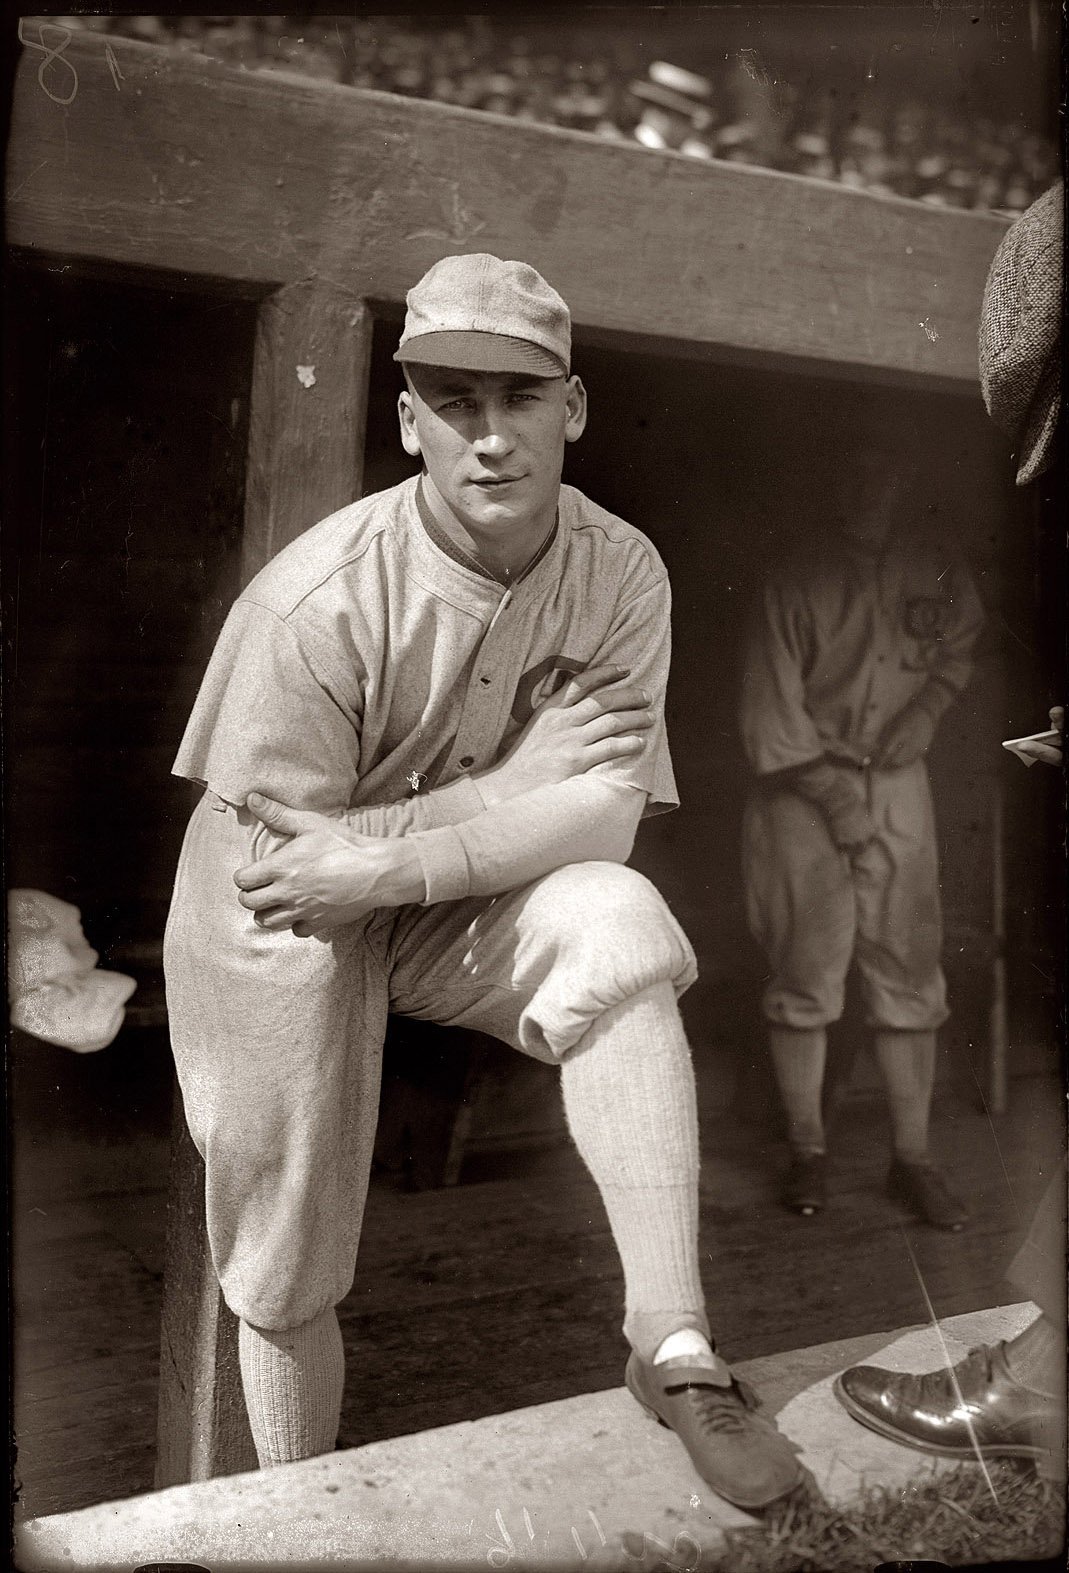 Chicago White Sox centerfielder Oscar "Happy" Felsch in 1920, his final season in the majors before being banned for life for his role as one of the "eight men out" who fixed the 1919 World Series. View full size. Geo. Grantham Bain Collection.